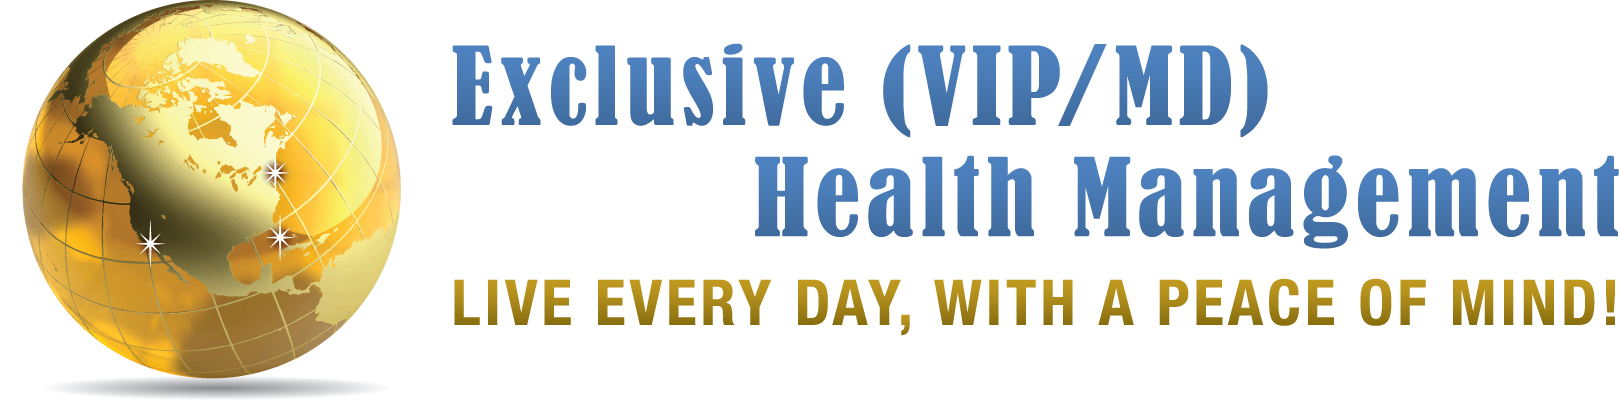 Exclusive (VIP/MD) Health Management